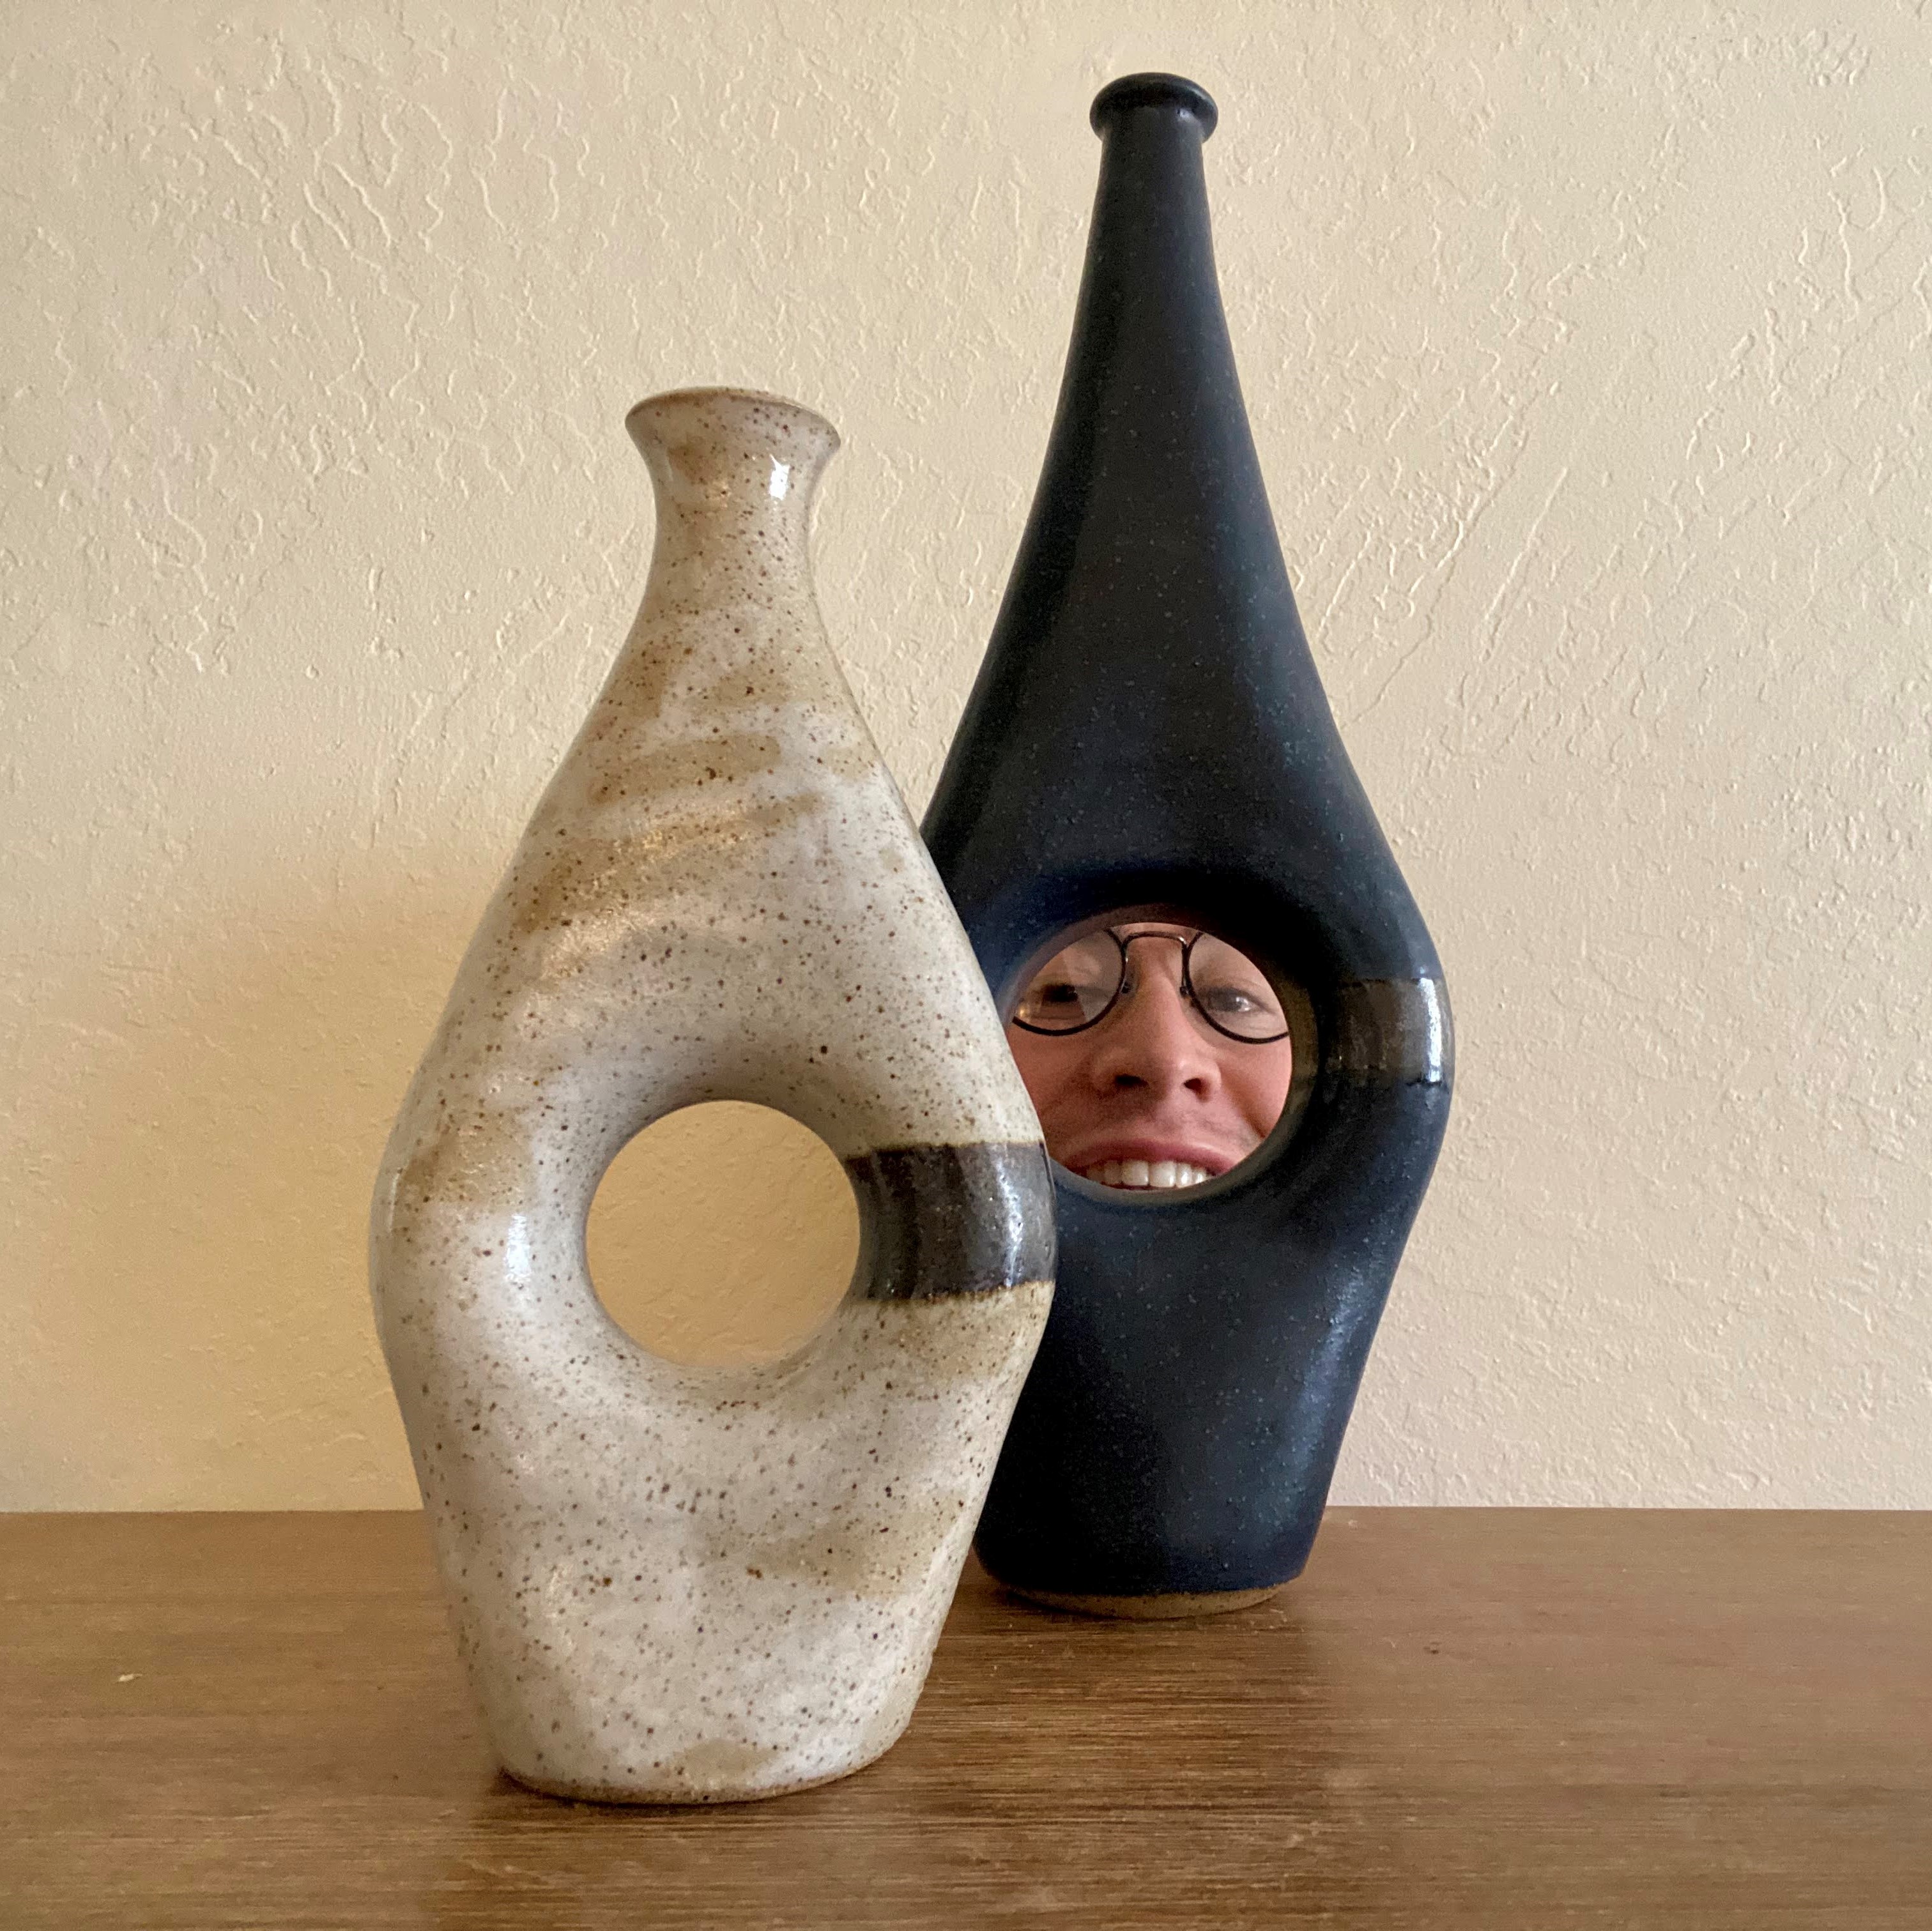 Vases with circular hole (and my face)